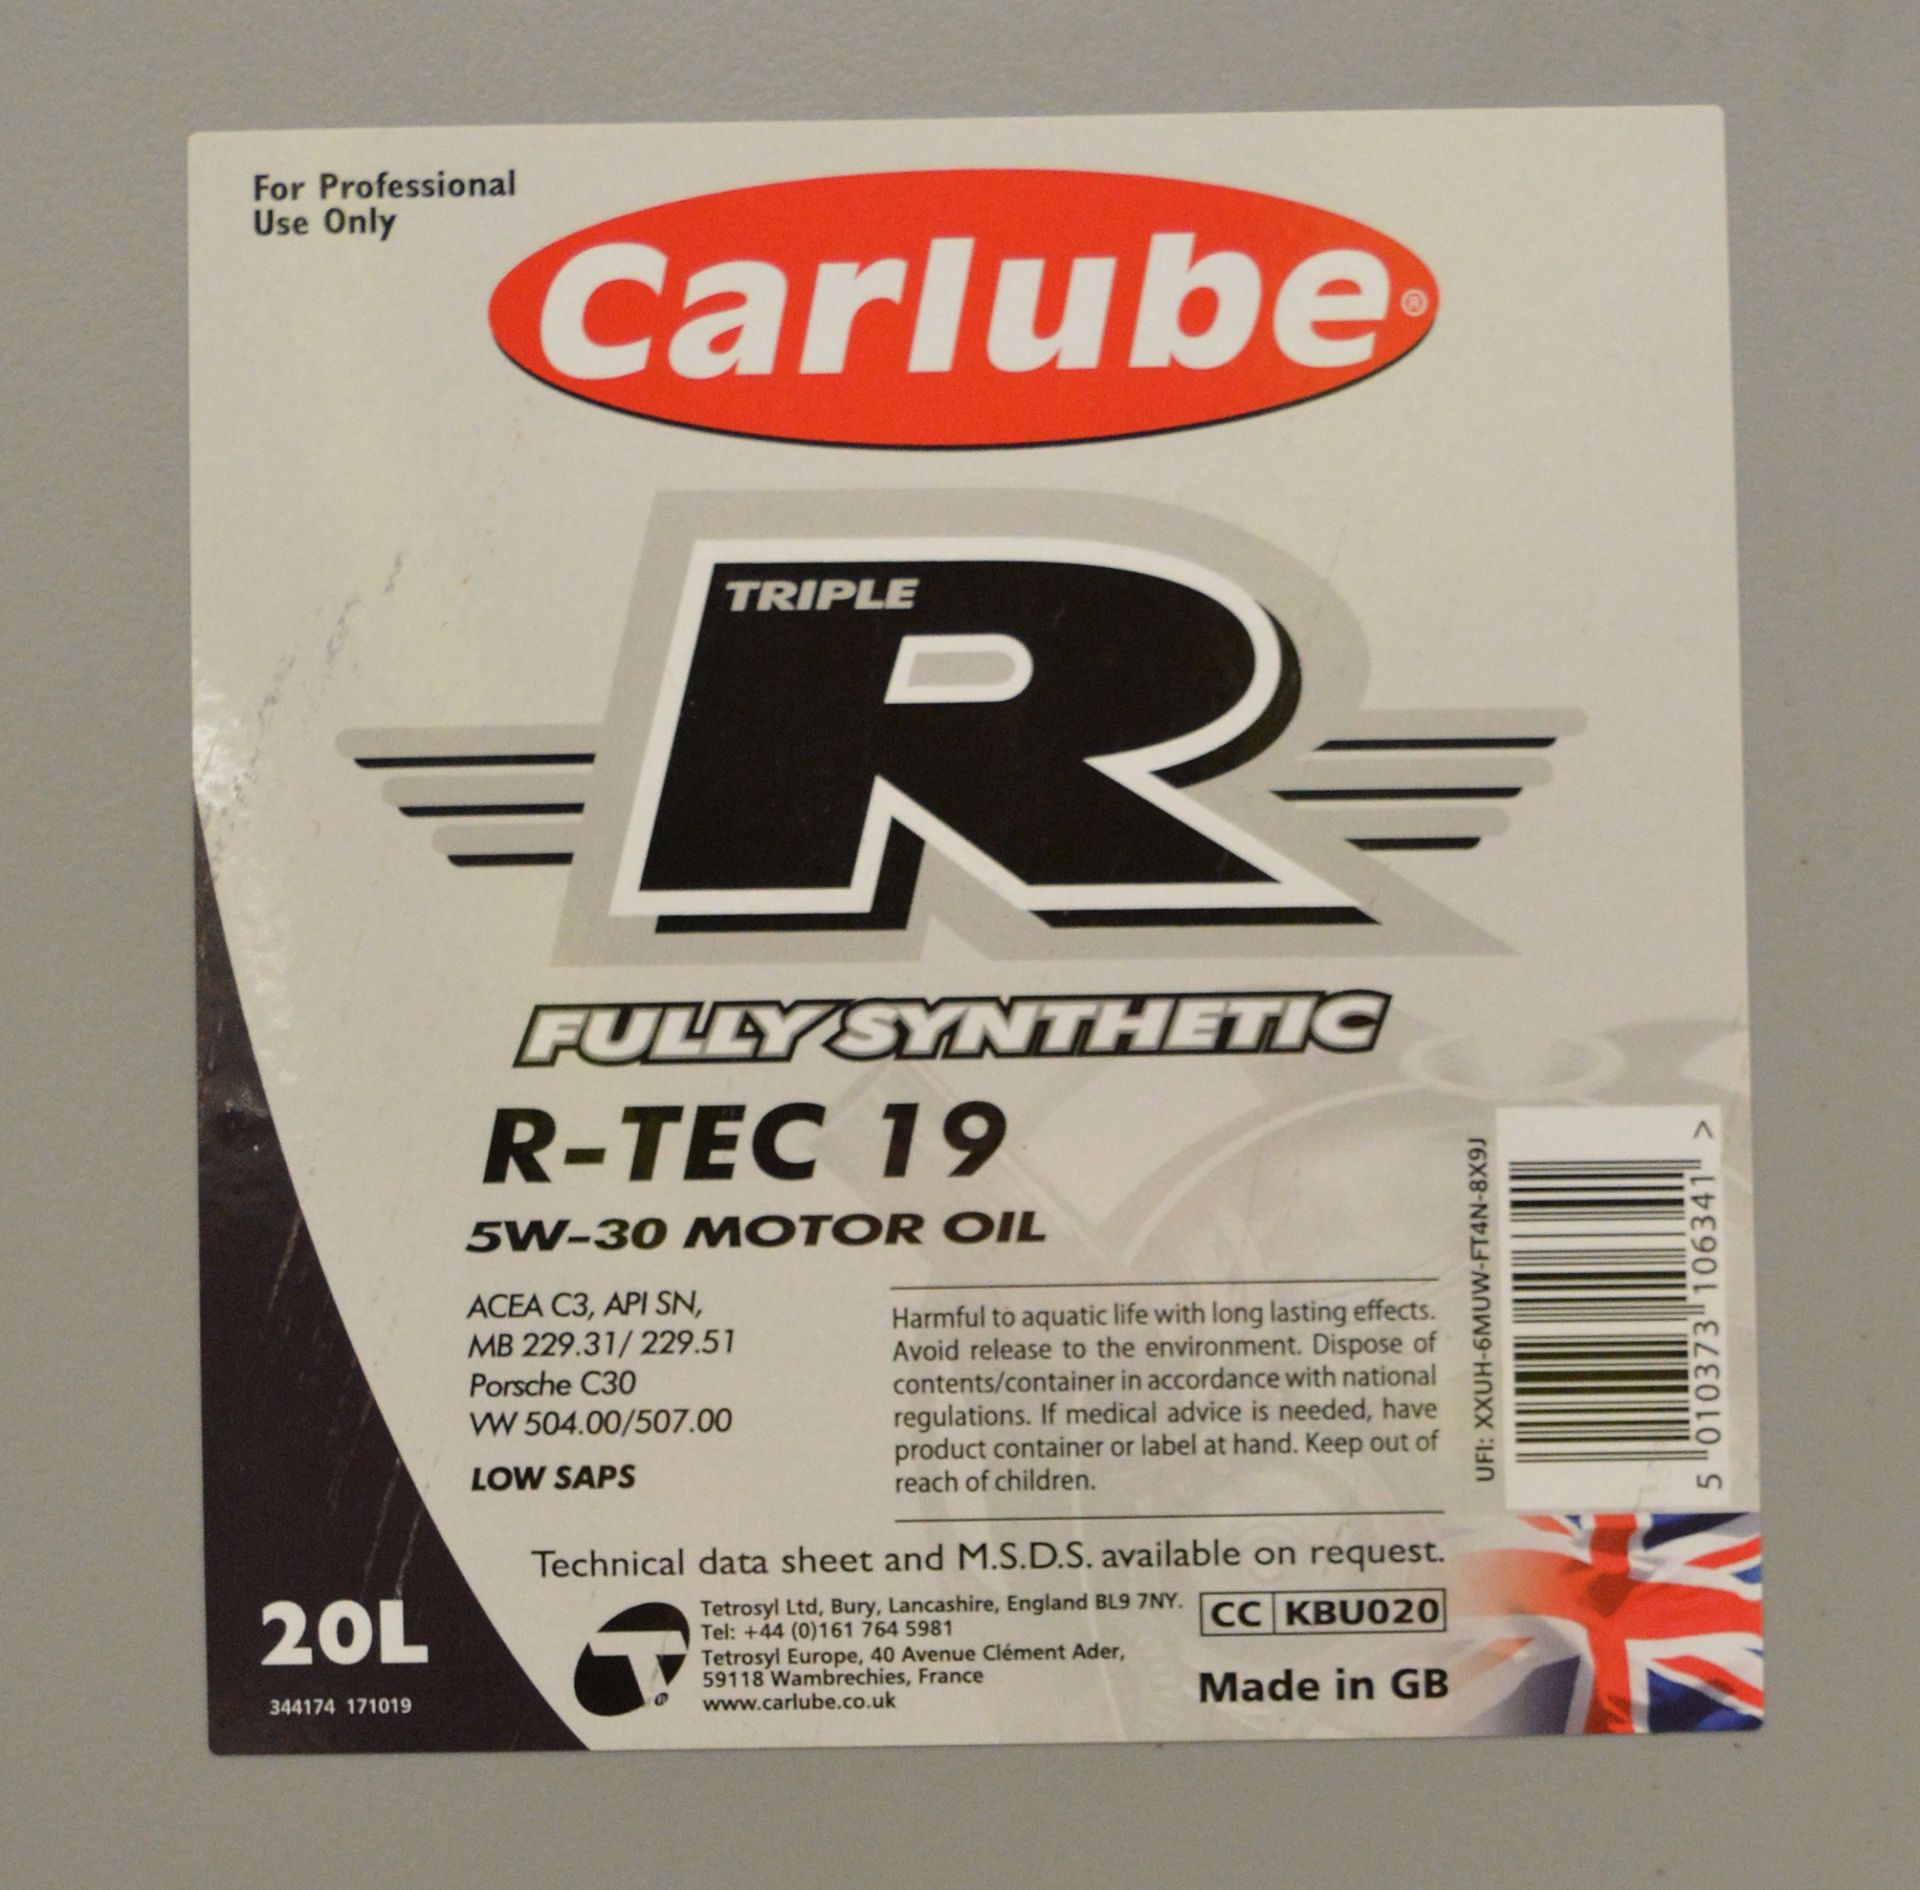 Carlube R fully synthetic R-Tec 19 Motor Oil - 20L - Image 2 of 2